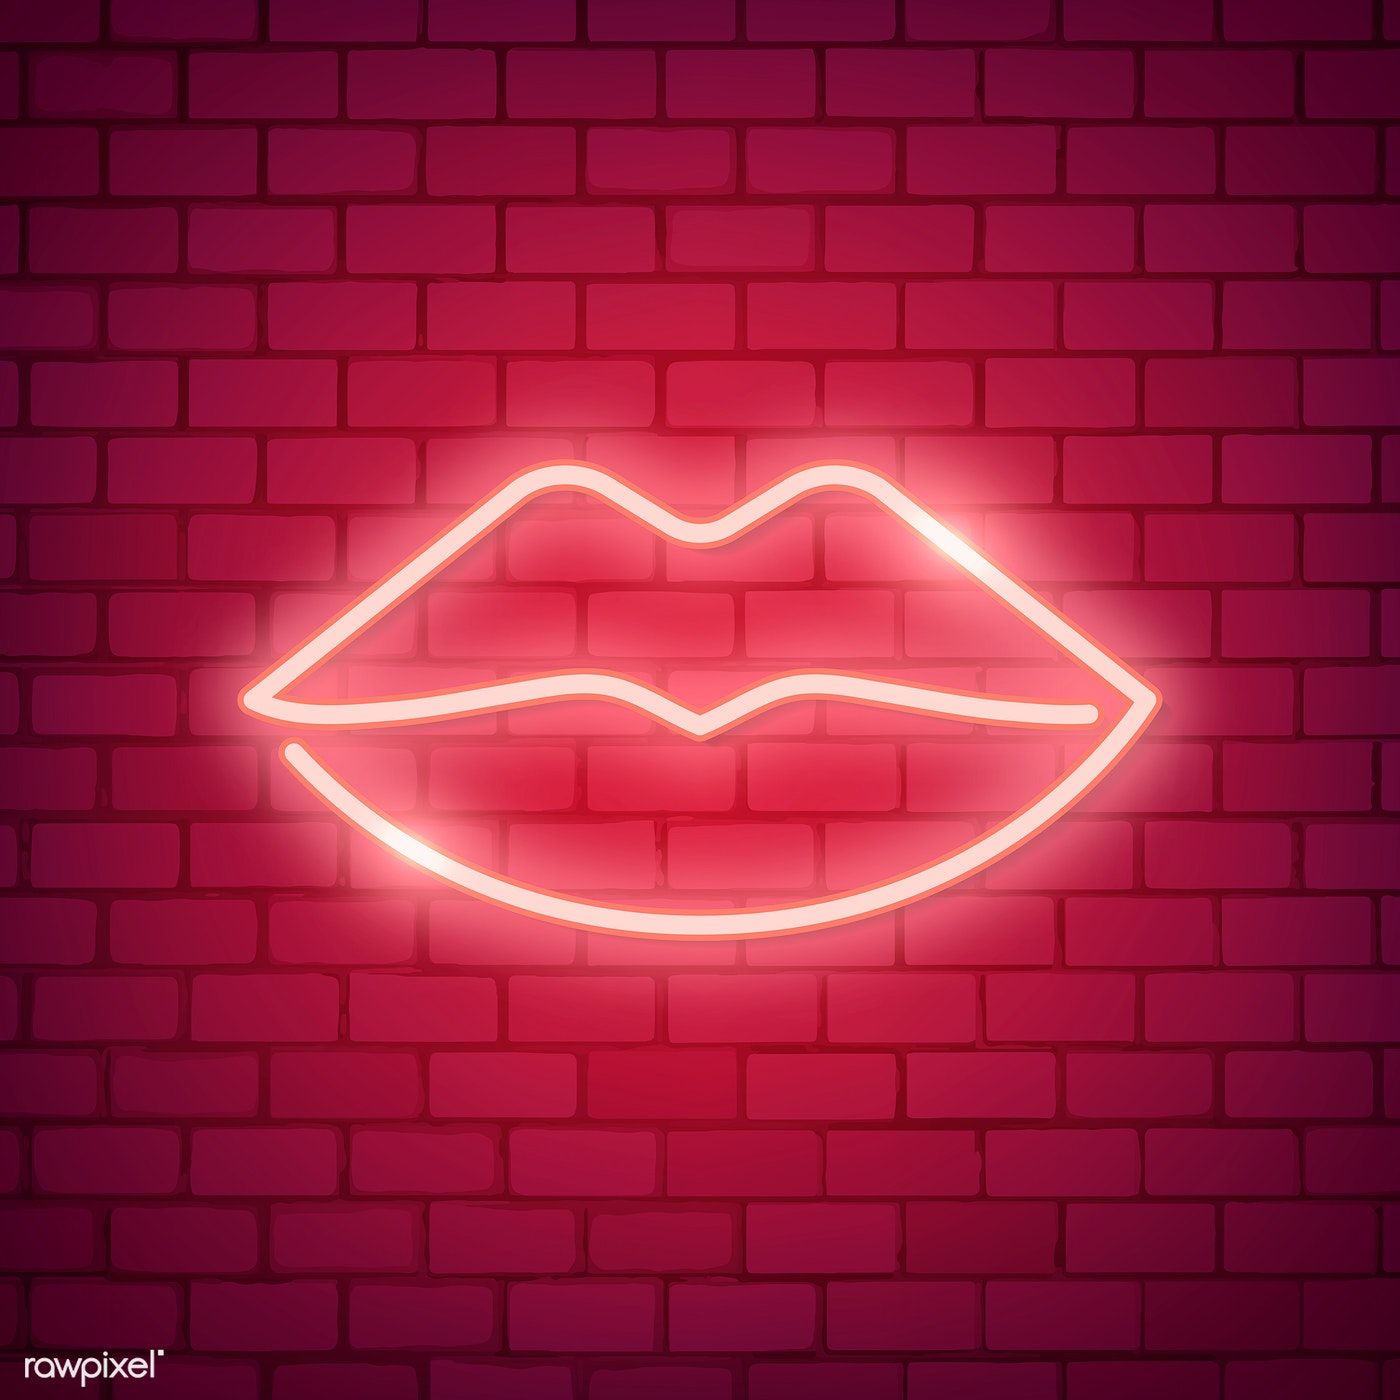 Neon Light Kiss Sign On Red Background Image By Rawpixel